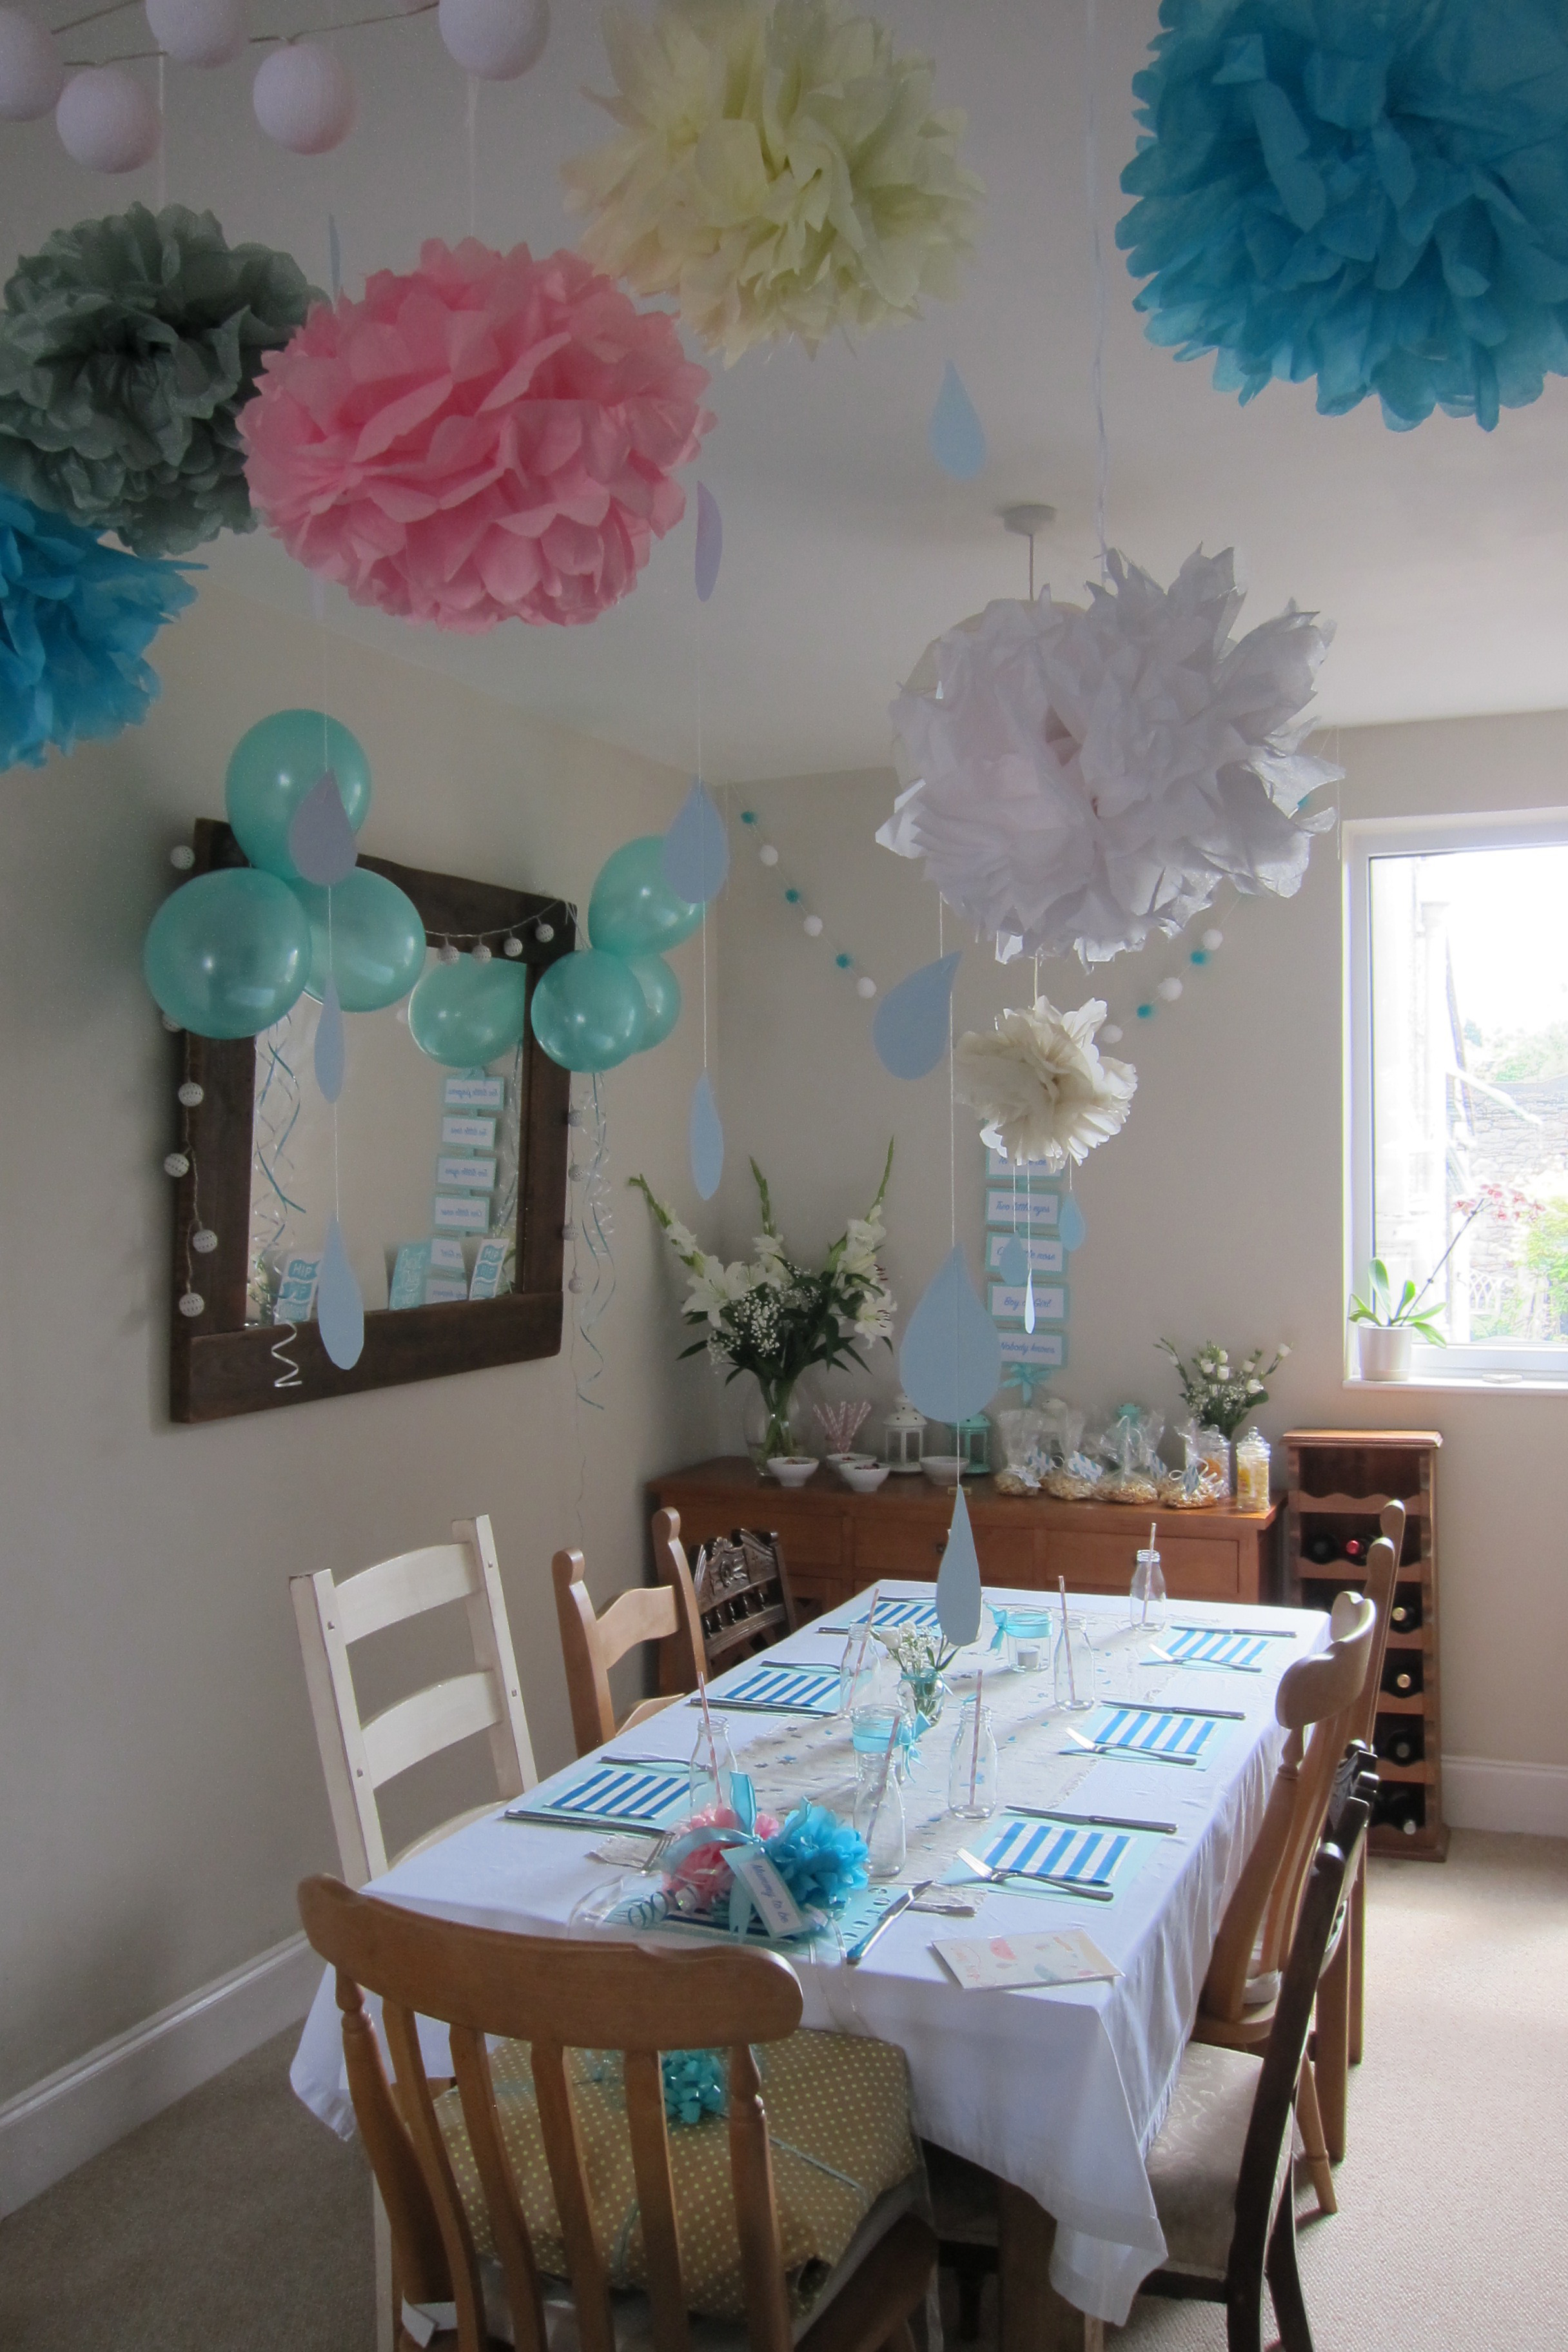 Decorations for baby shower